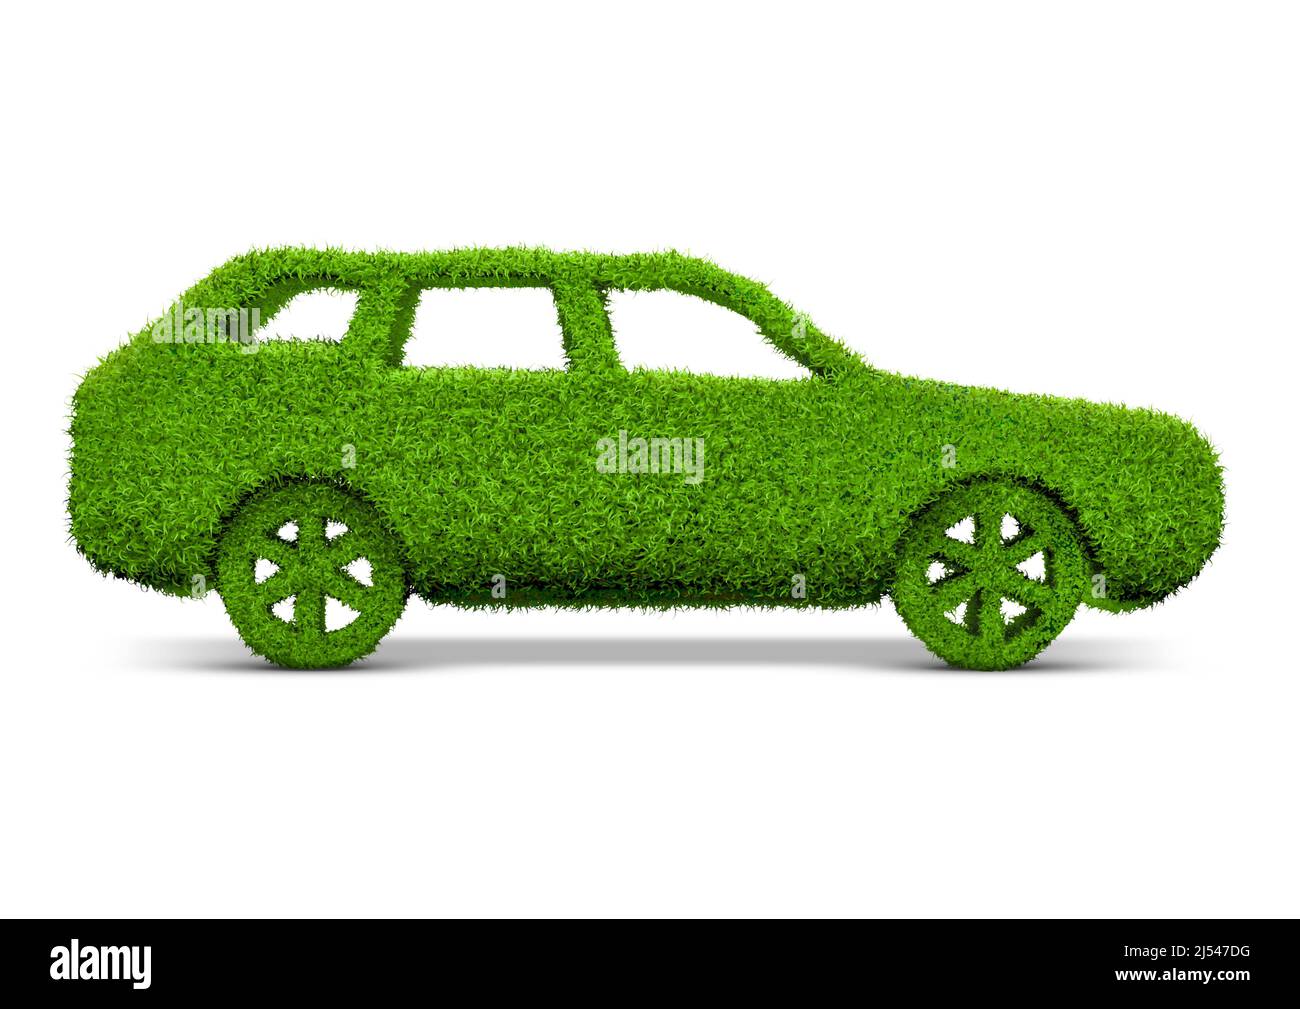 Ecological automobile - 3D illustration of car made from grass isolated on white studio background Stock Photo